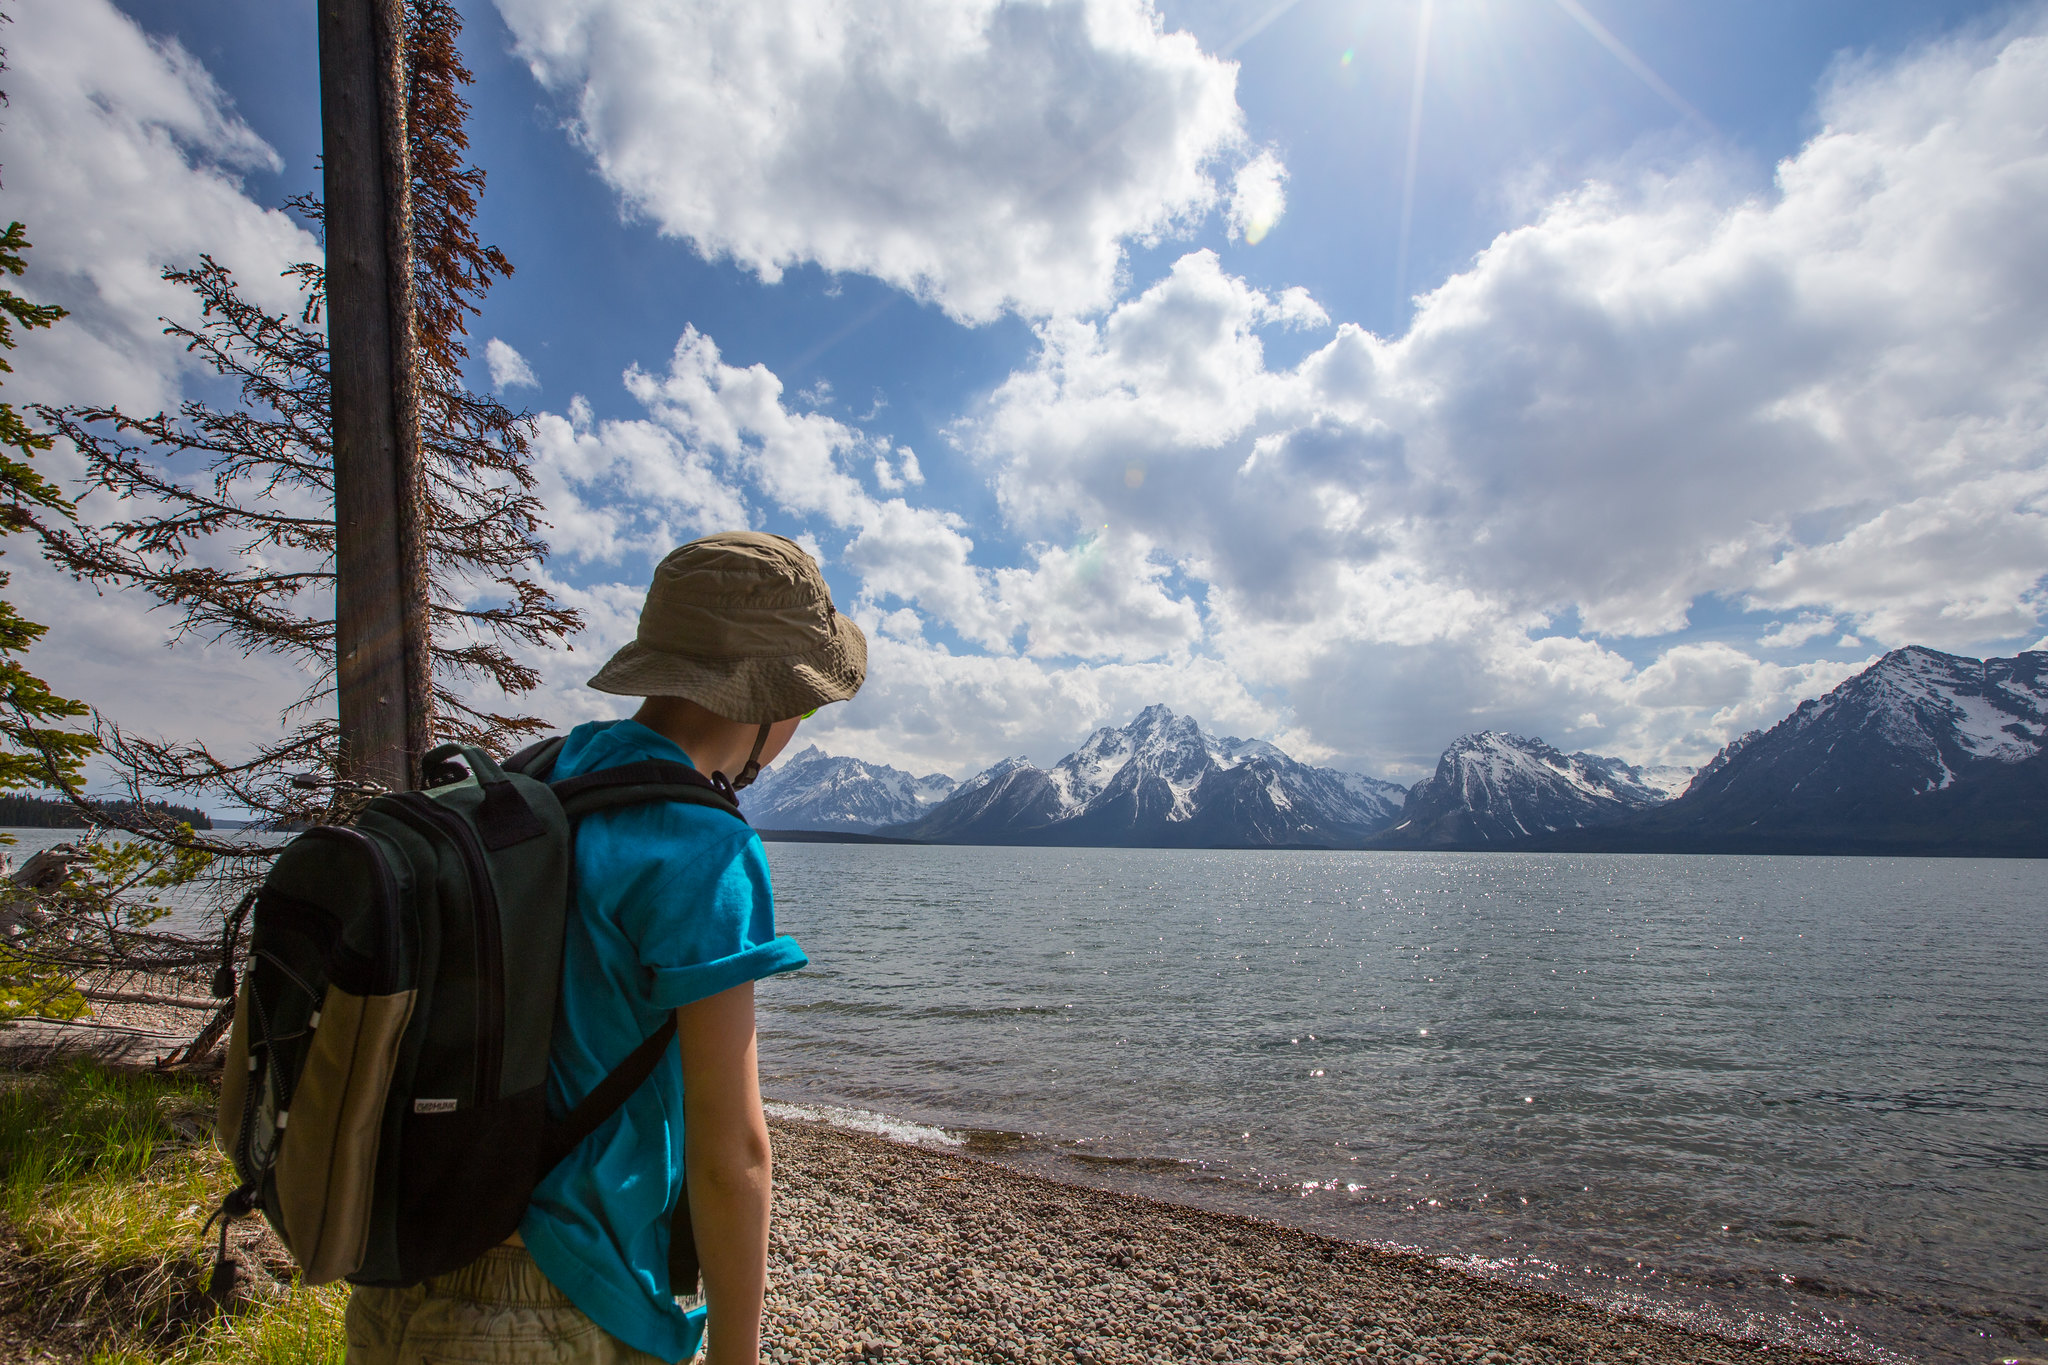 A youth looks at the Tetons over the lake.